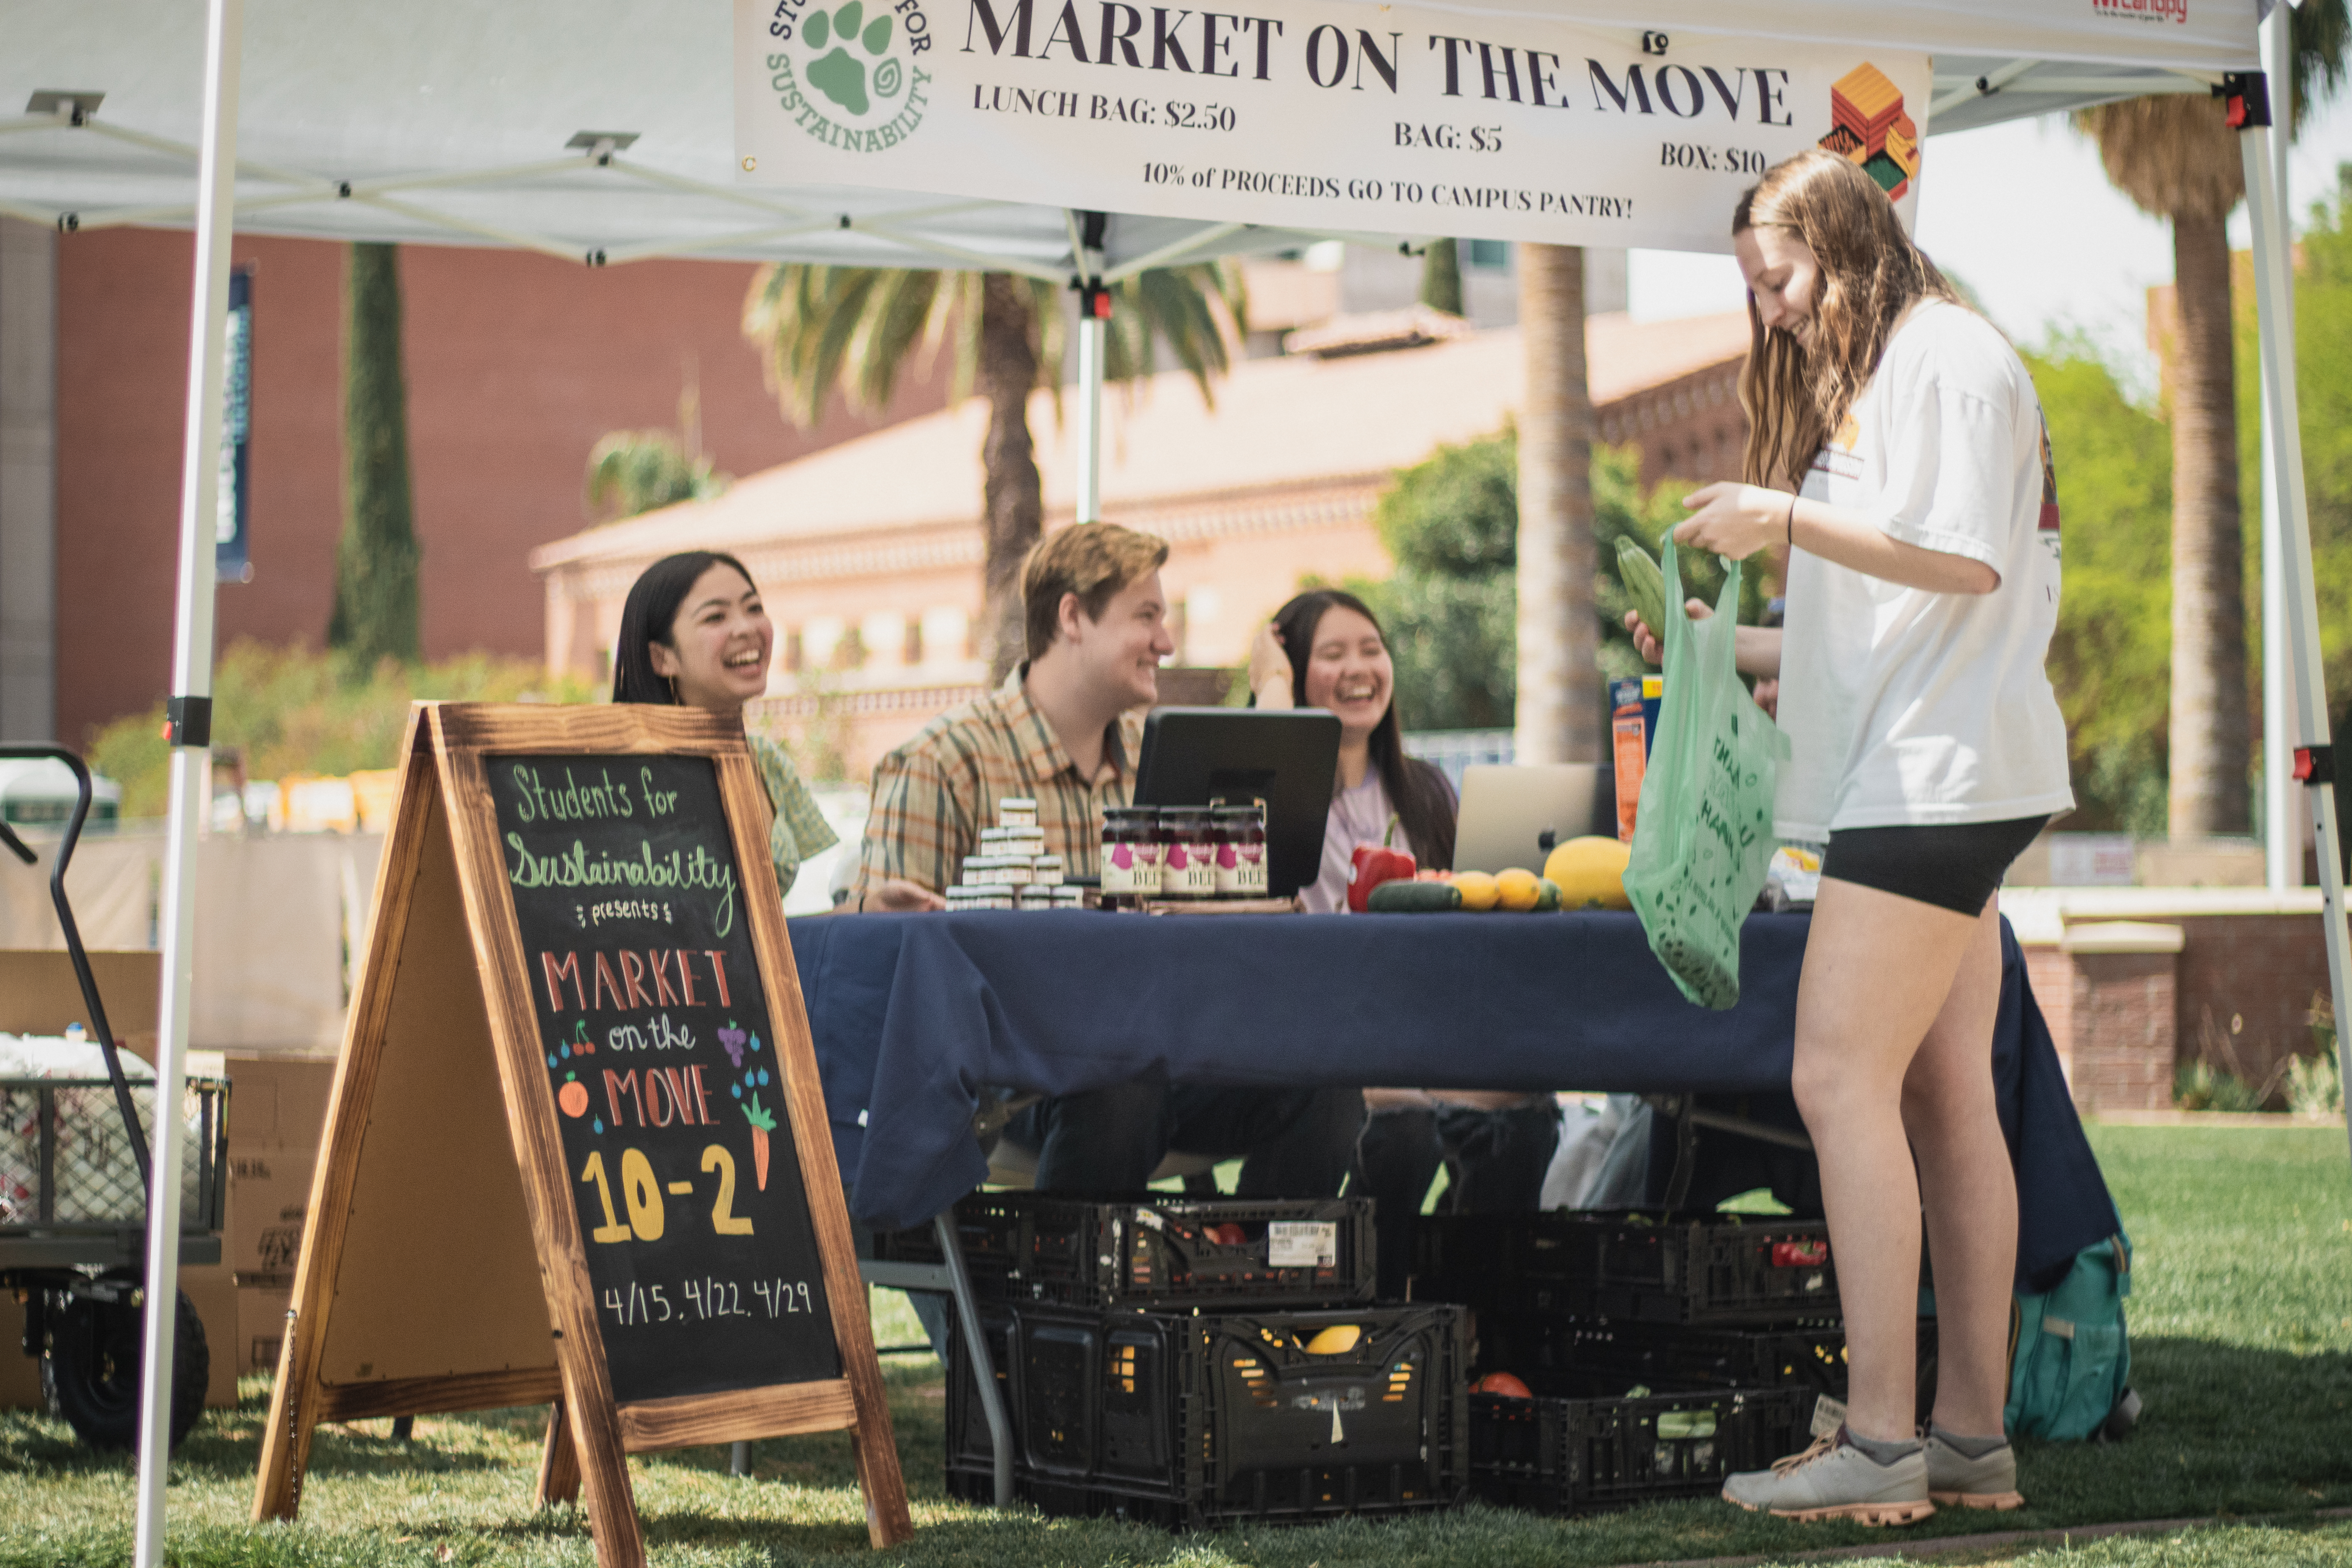 A student bagging produce from Students for Sustainability's Market on the Move pop-up event at the mall